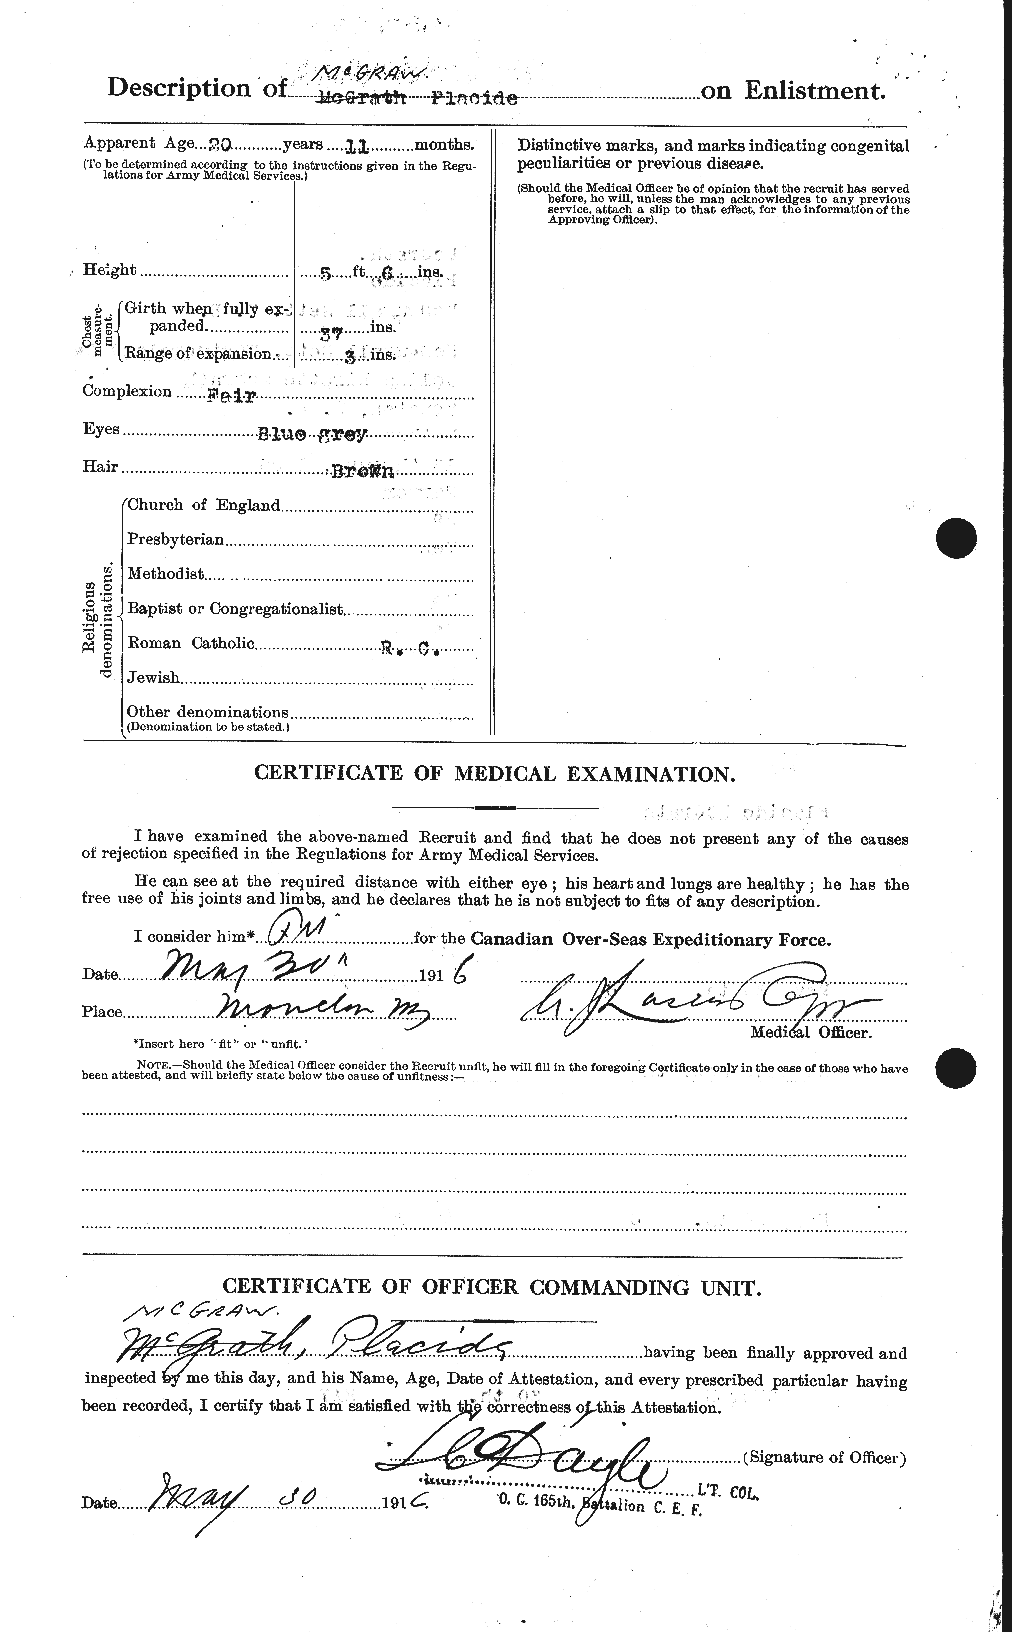 Personnel Records of the First World War - CEF 523748b